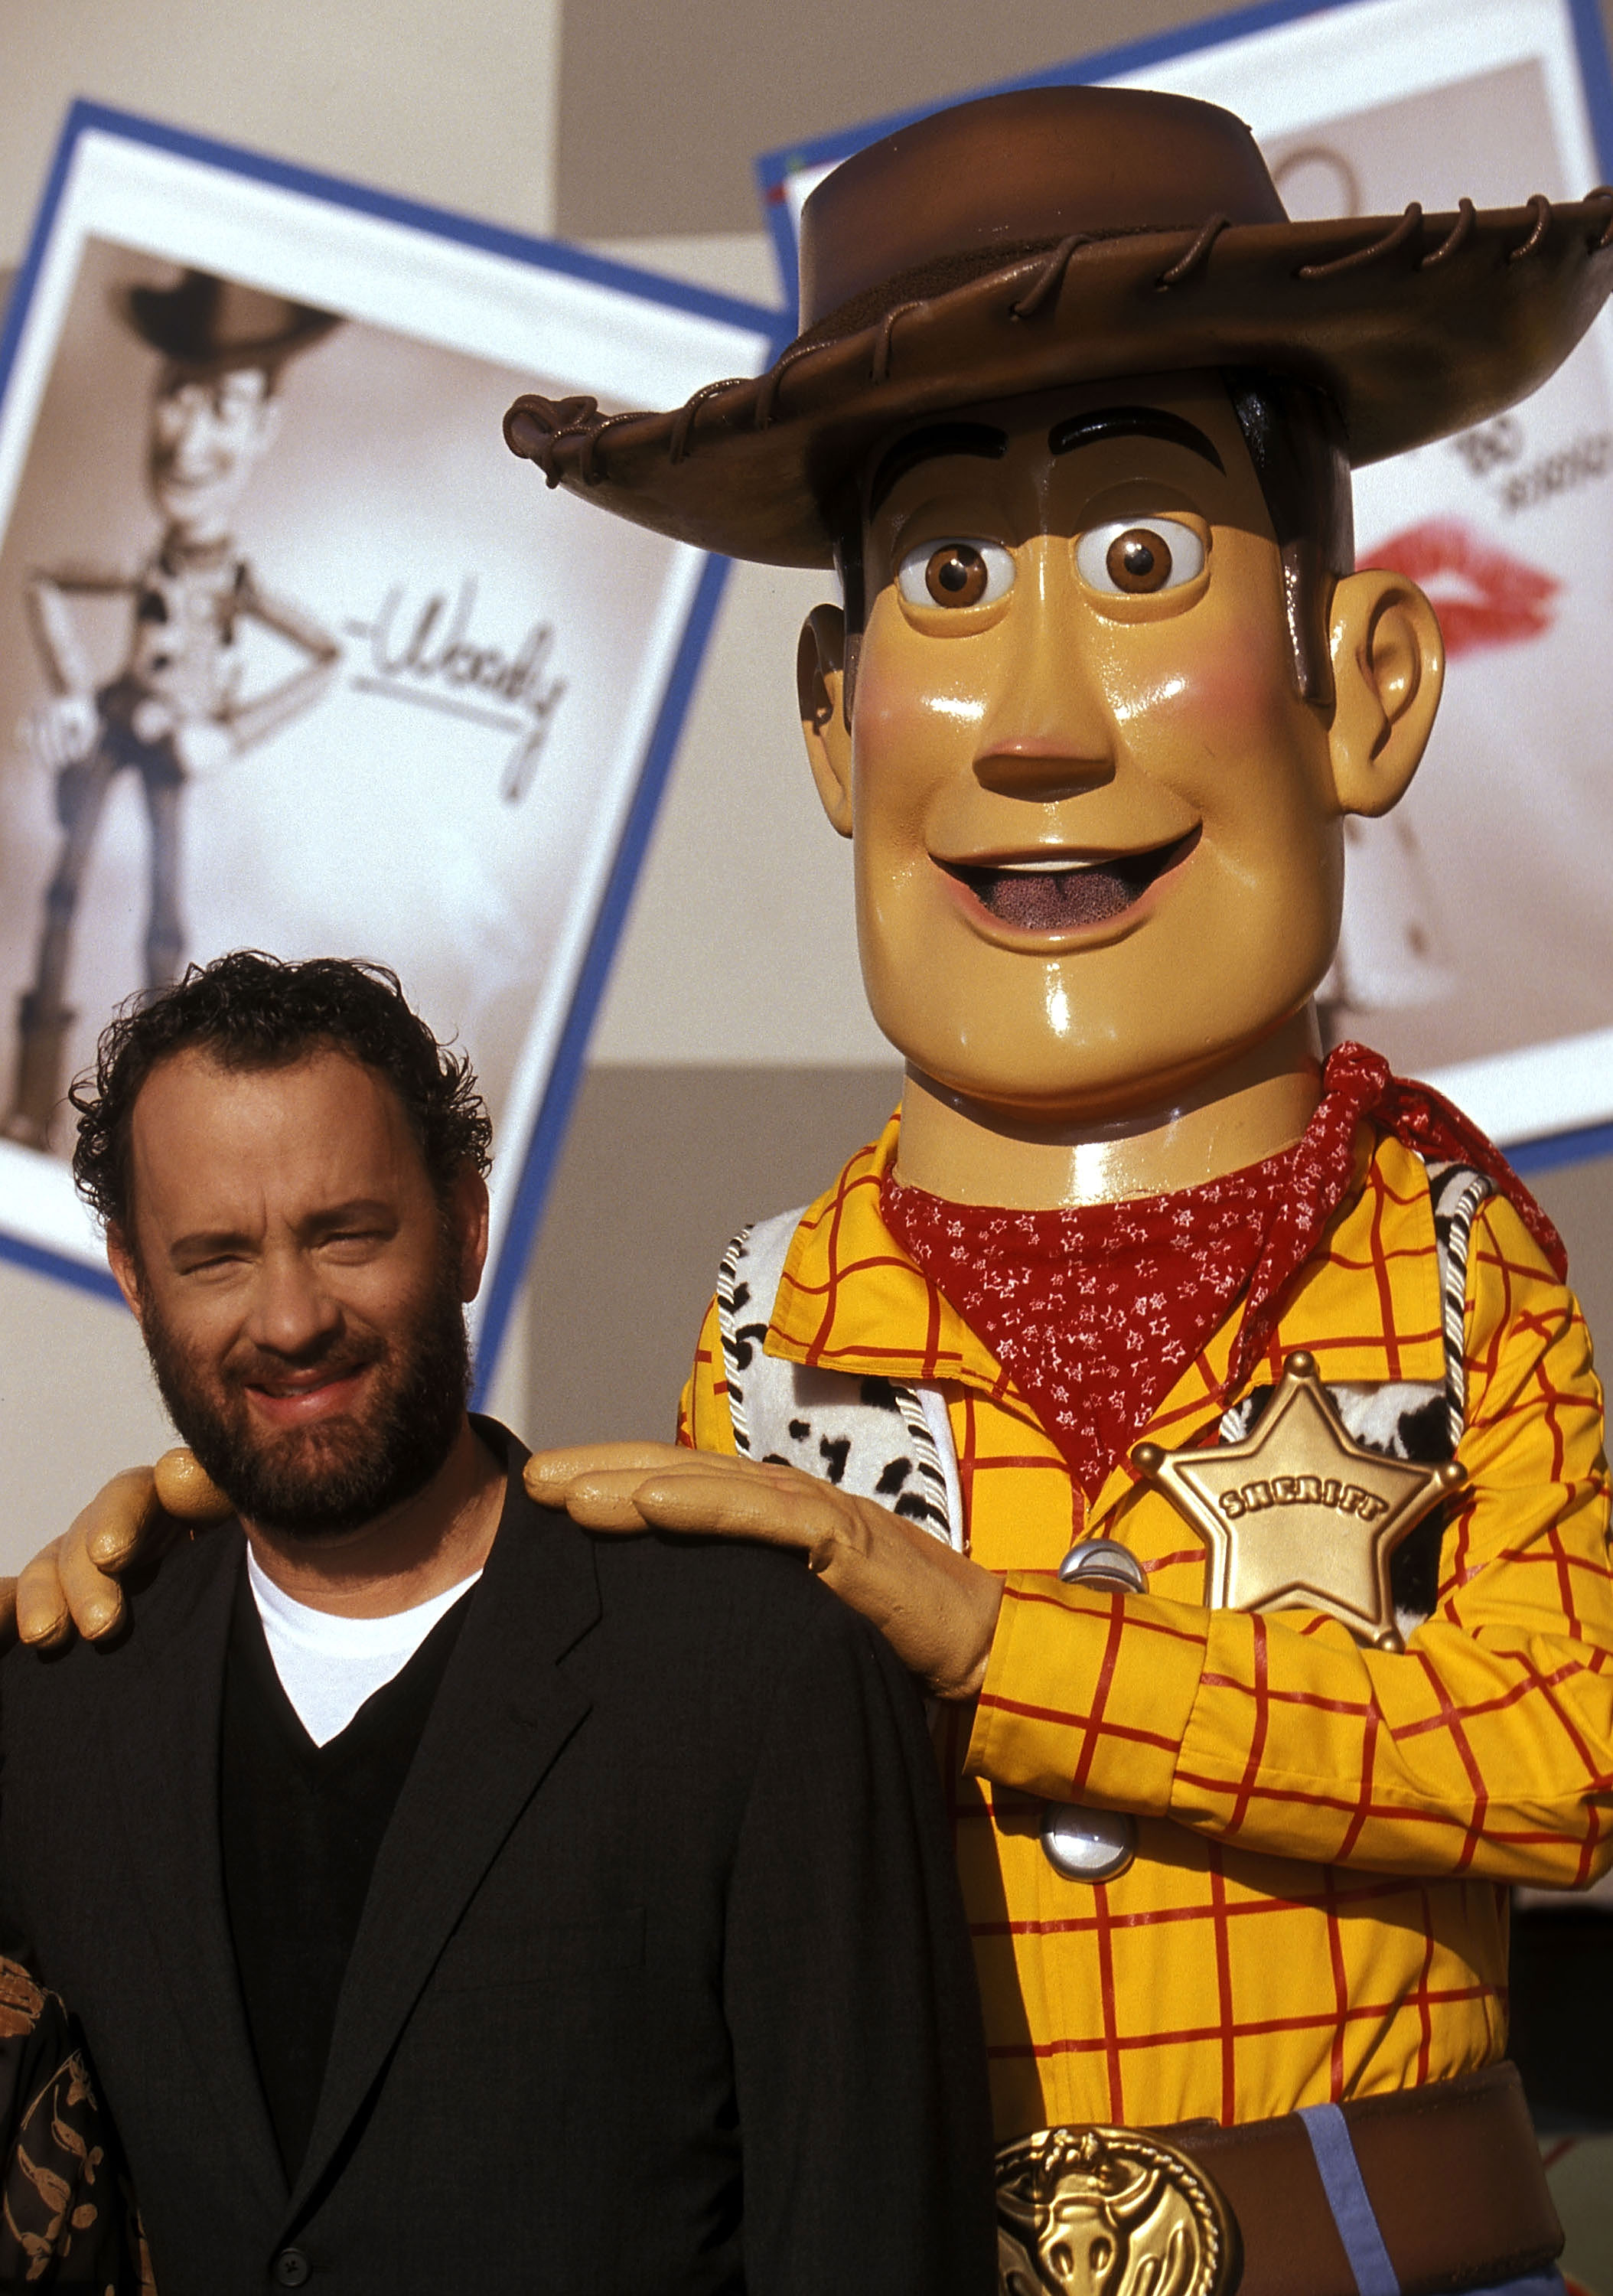 Tom-Hanks-and-Woody-From-Toy-Story-4